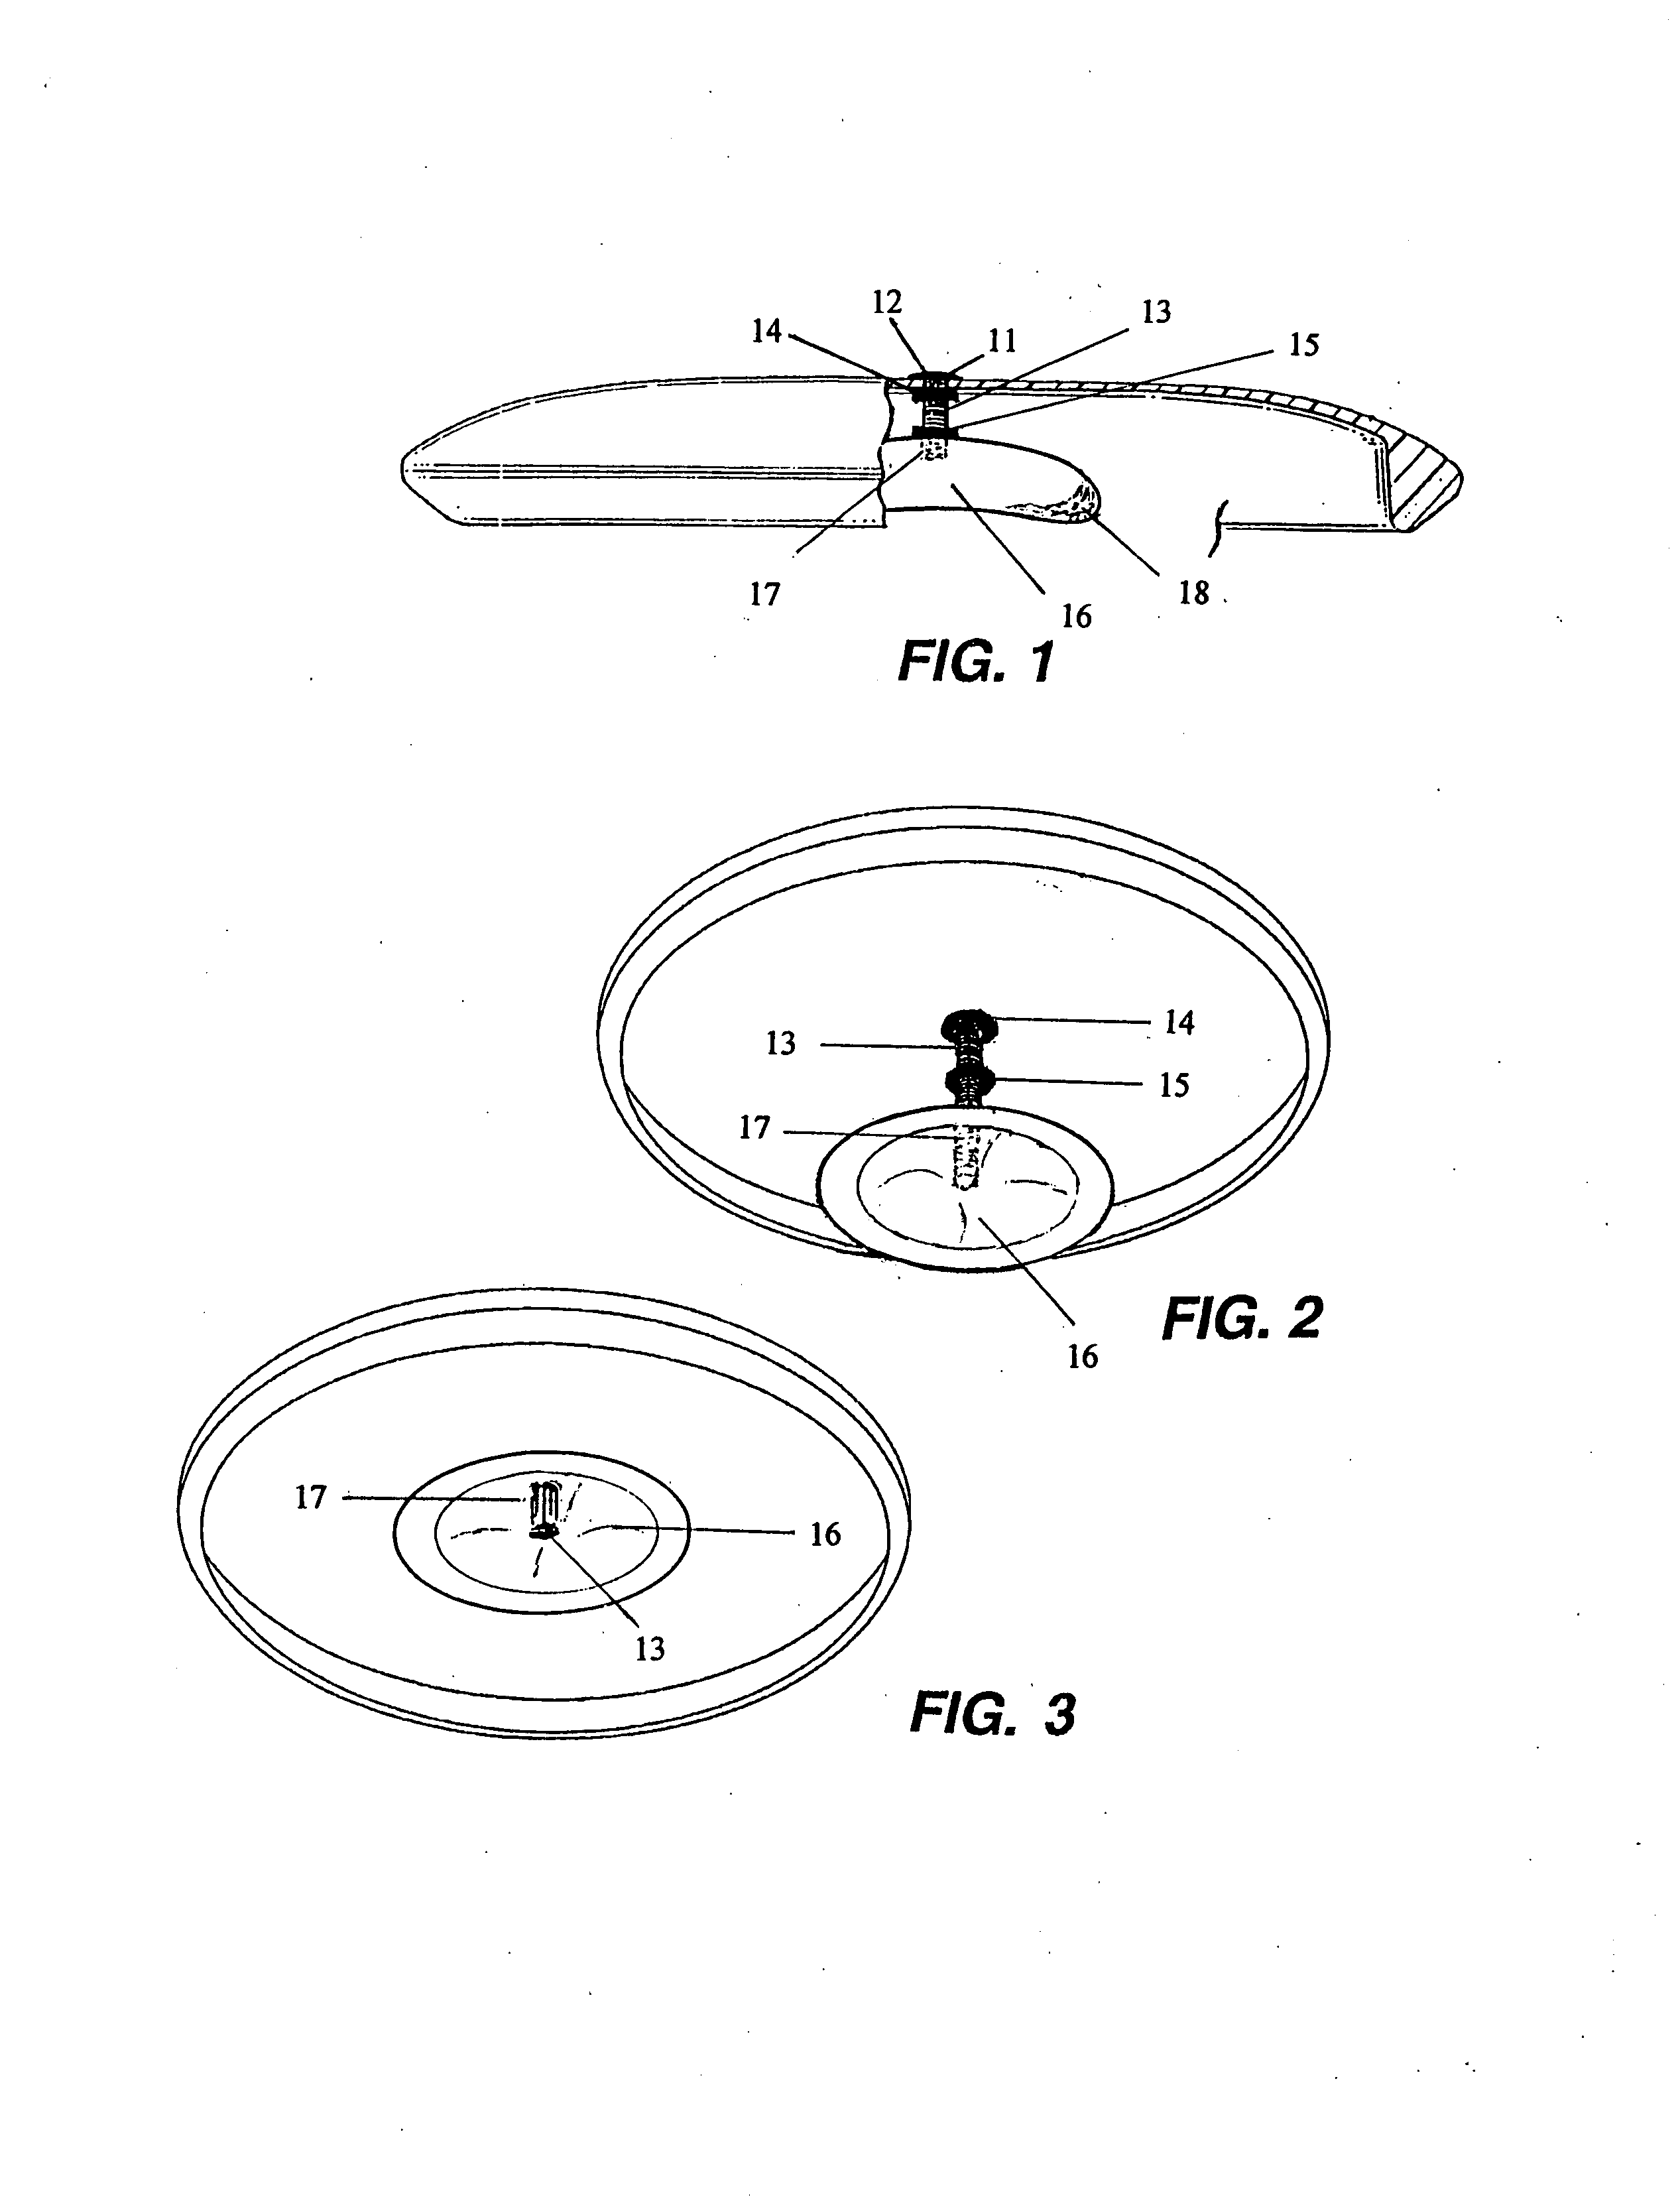 Recreational flying disk apparatus for enhanced flight enabling and traversing land and water surfaces